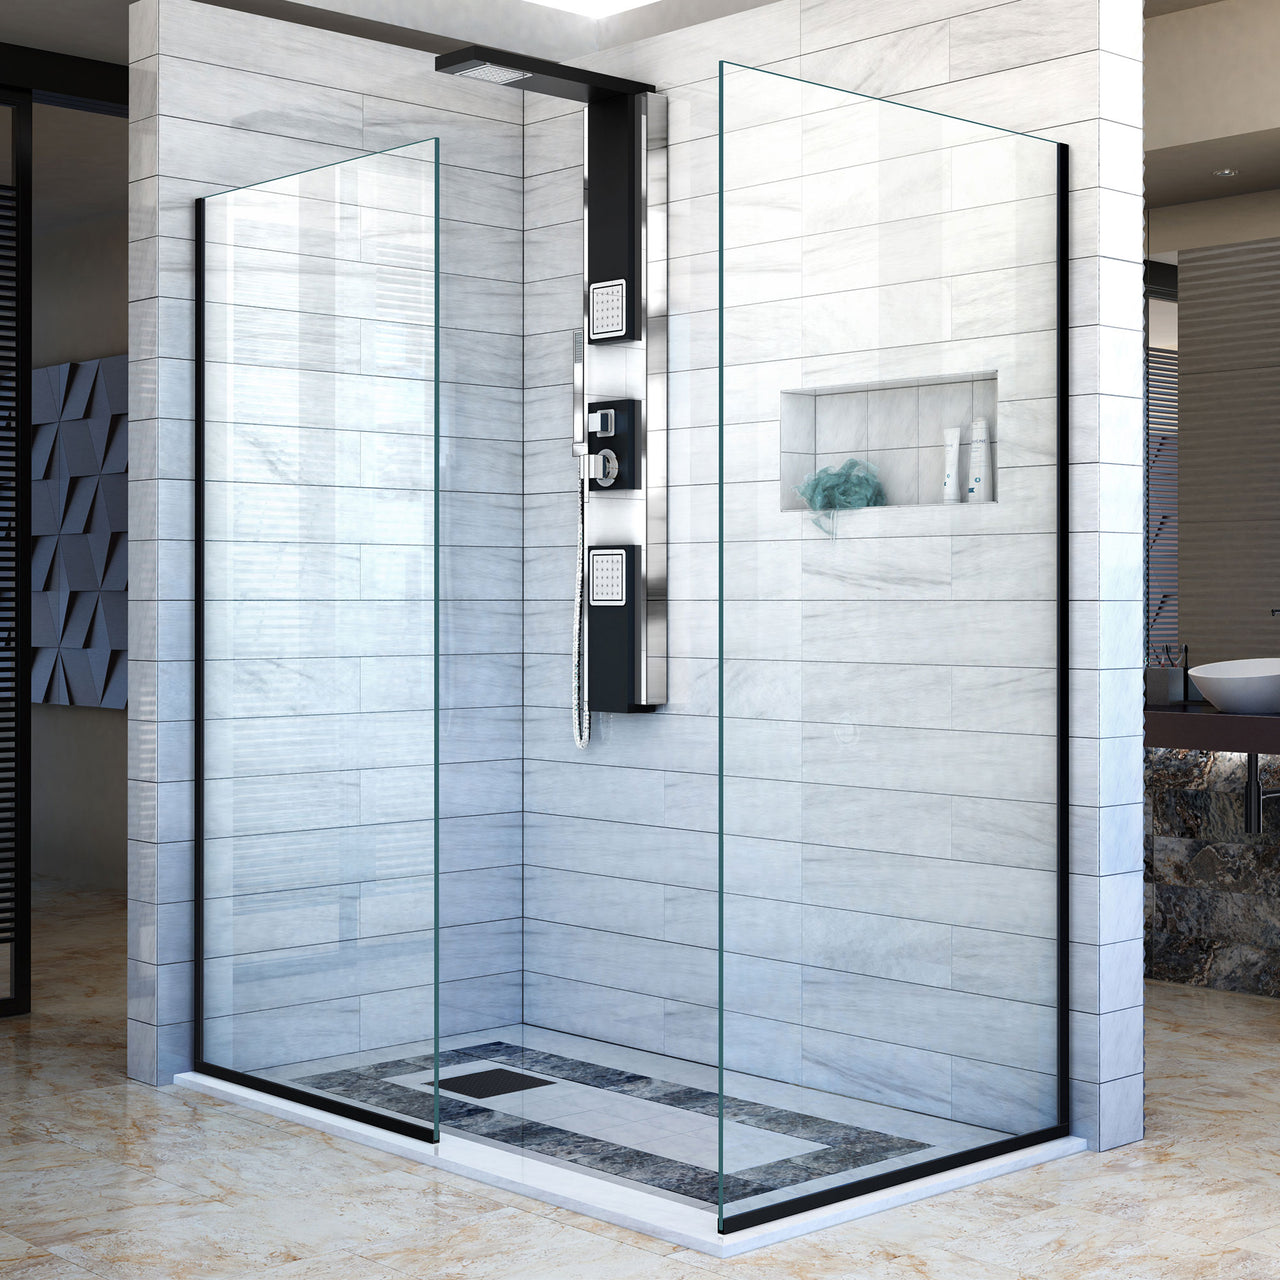 DreamLine Linea Two Individual Frameless Shower Screens 30 in. W x 72 in. H each, Open Entry Design - BNGBath